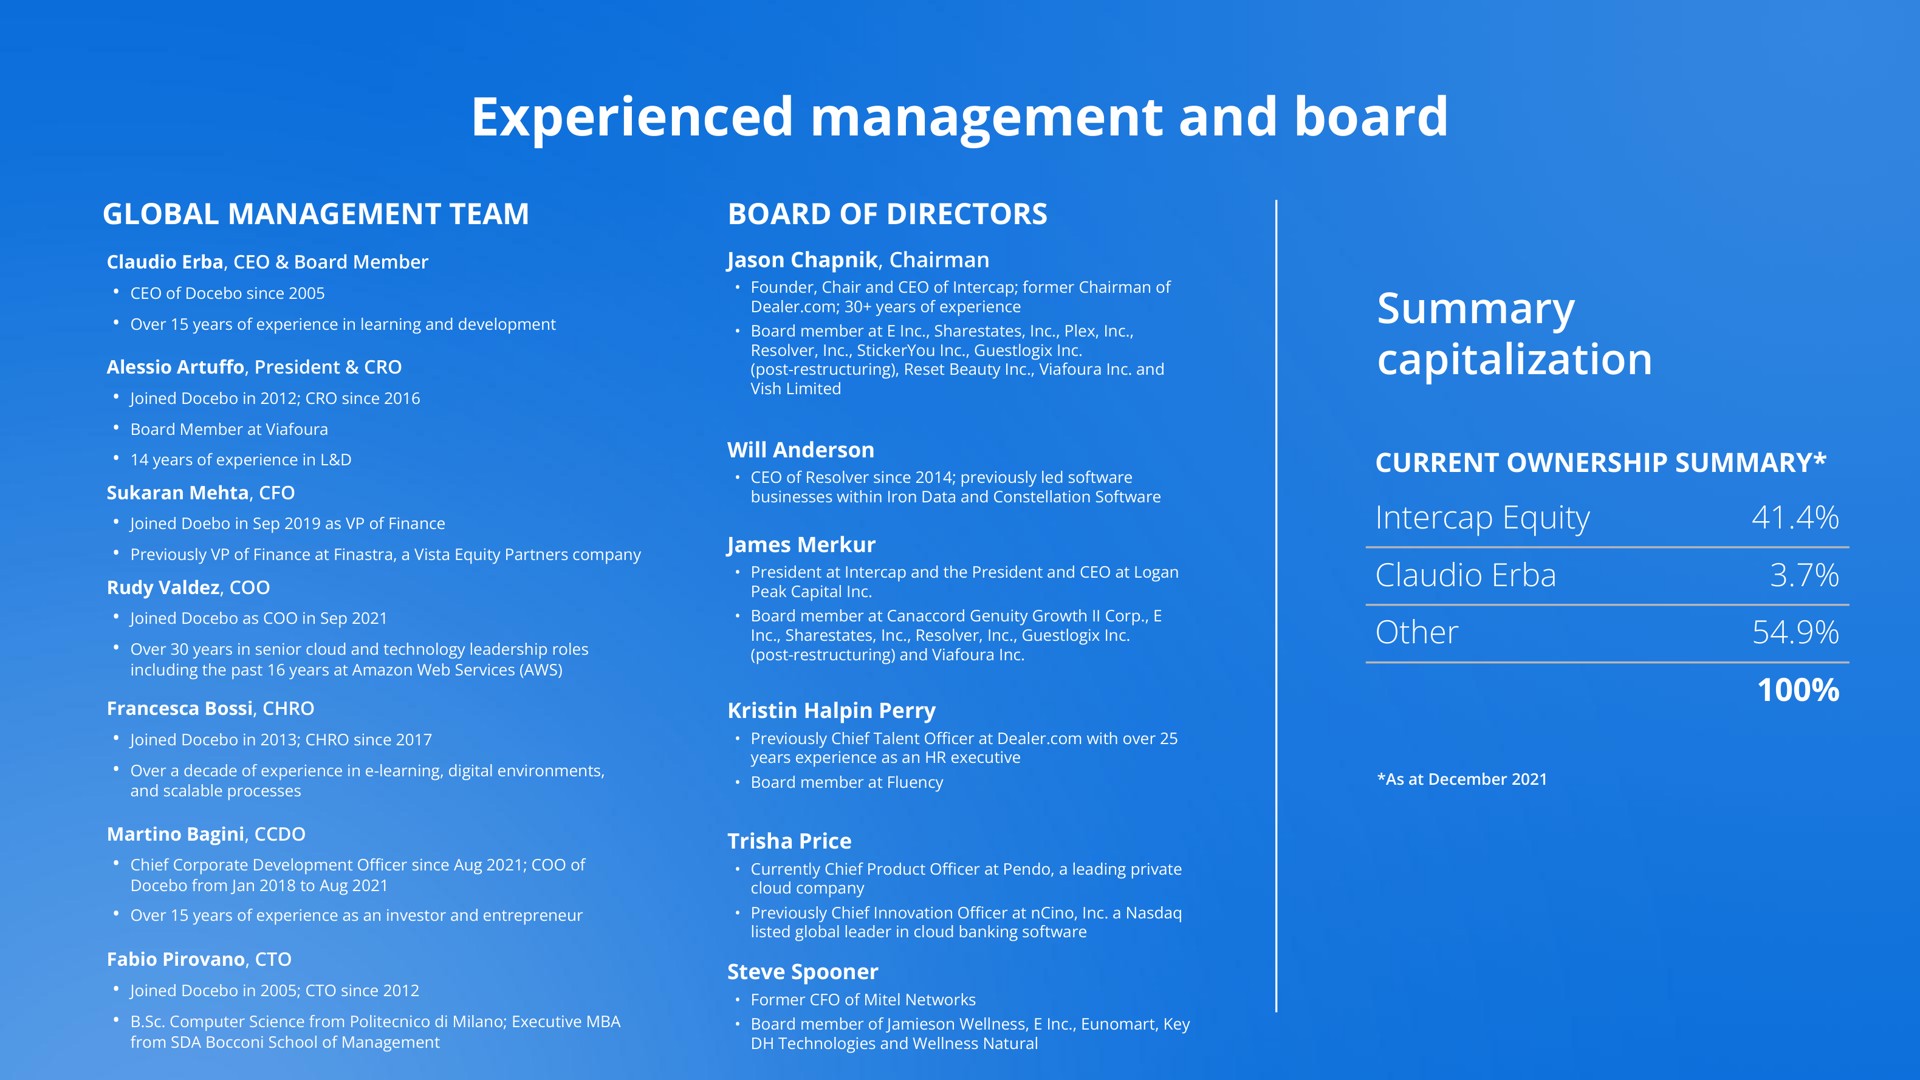 experienced management and board | Docebo